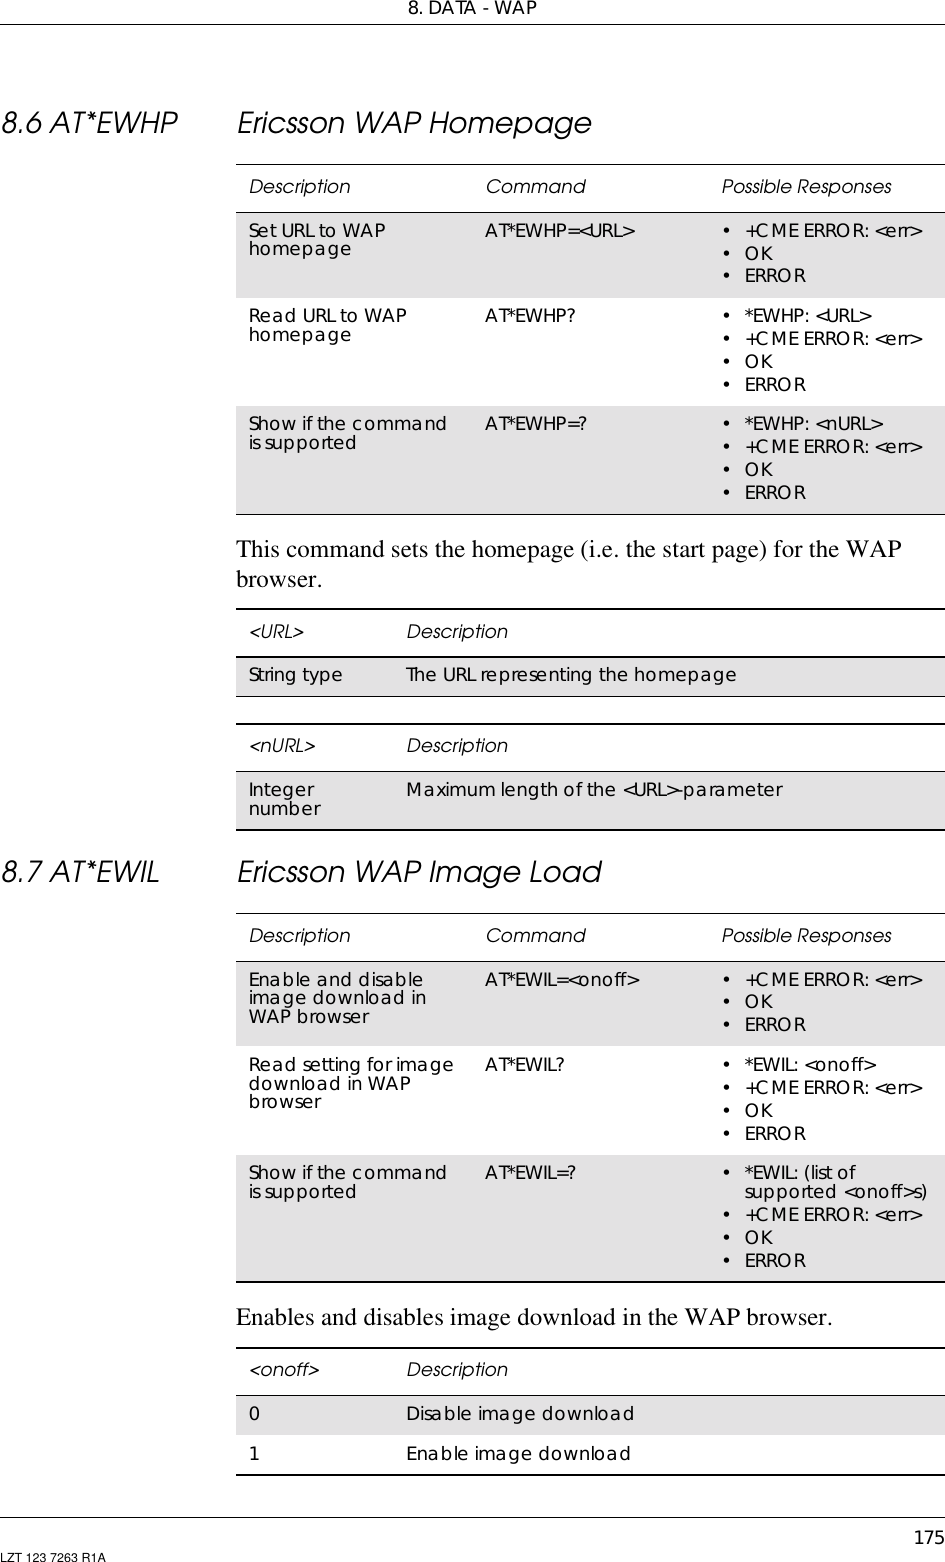 8. DATA - WAP175LZT 123 7263 R1A8.6 AT*EWHP Ericsson WAP HomepageThis command sets the homepage (i.e. the start page) for the WAPbrowser.8.7 AT*EWIL Ericsson WAP Image LoadEnables and disables image download in the WAP browser.Description Command Possible ResponsesSet URL to WAPhomepage AT*EWHP=&lt;URL&gt; •+CMEERROR:&lt;err&gt;•OK•ERRORRead URL to WAPhomepage AT*EWHP? •*EWHP:&lt;URL&gt;•+CMEERROR:&lt;err&gt;•OK•ERRORShow if the commandis supported AT*EWHP=? •*EWHP:&lt;nURL&gt;•+CMEERROR:&lt;err&gt;•OK•ERROR&lt;URL&gt; DescriptionString type The URL representing the homepage&lt;nURL&gt; DescriptionIntegernumber Maximum length of the &lt;URL&gt;-parameterDescription Command Possible ResponsesEnable and disableimage download inWAP browserAT*EWIL=&lt;onoff&gt; •+CMEERROR:&lt;err&gt;•OK•ERRORRead setting for imagedownload in WAPbrowserAT*EWIL? •*EWIL:&lt;onoff&gt;•+CMEERROR:&lt;err&gt;•OK•ERRORShow if the commandis supported AT*EWIL=? •*EWIL:(listofsupported &lt;onoff&gt;s)•+CMEERROR:&lt;err&gt;•OK•ERROR&lt;onoff&gt; Description0Disable image download1Enable image download